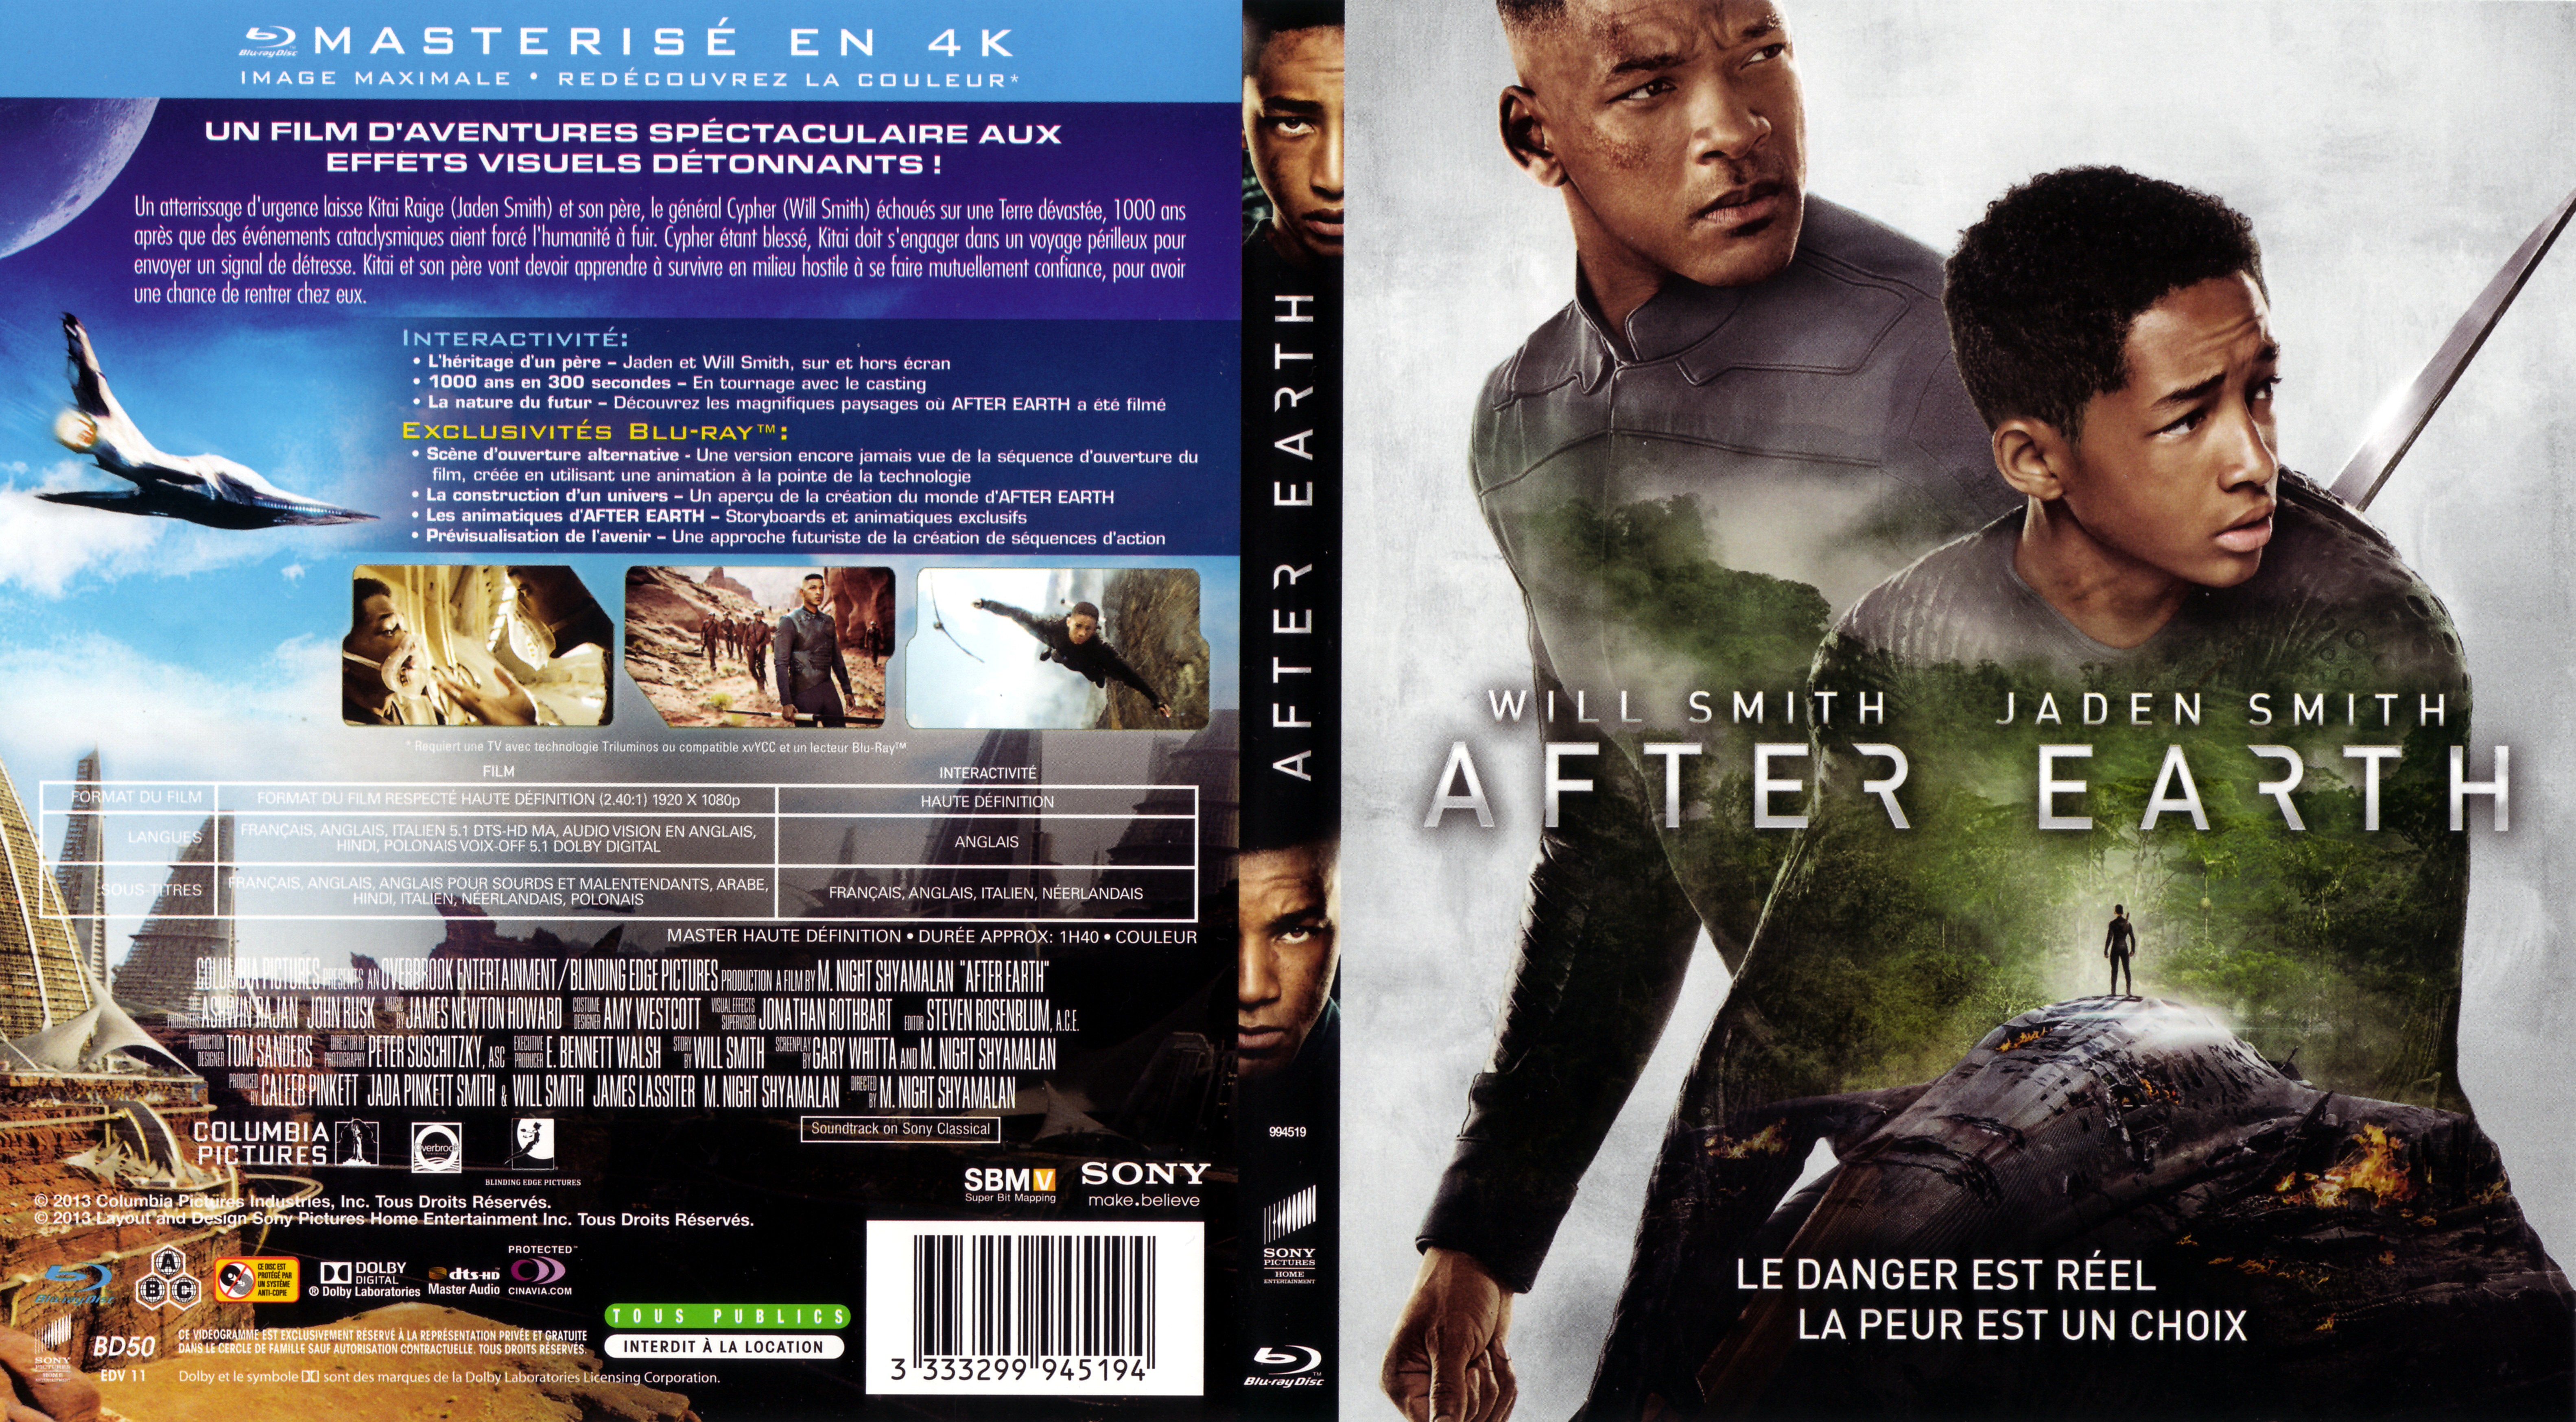 Jaquette DVD After earth 4K (BLU-RAY)